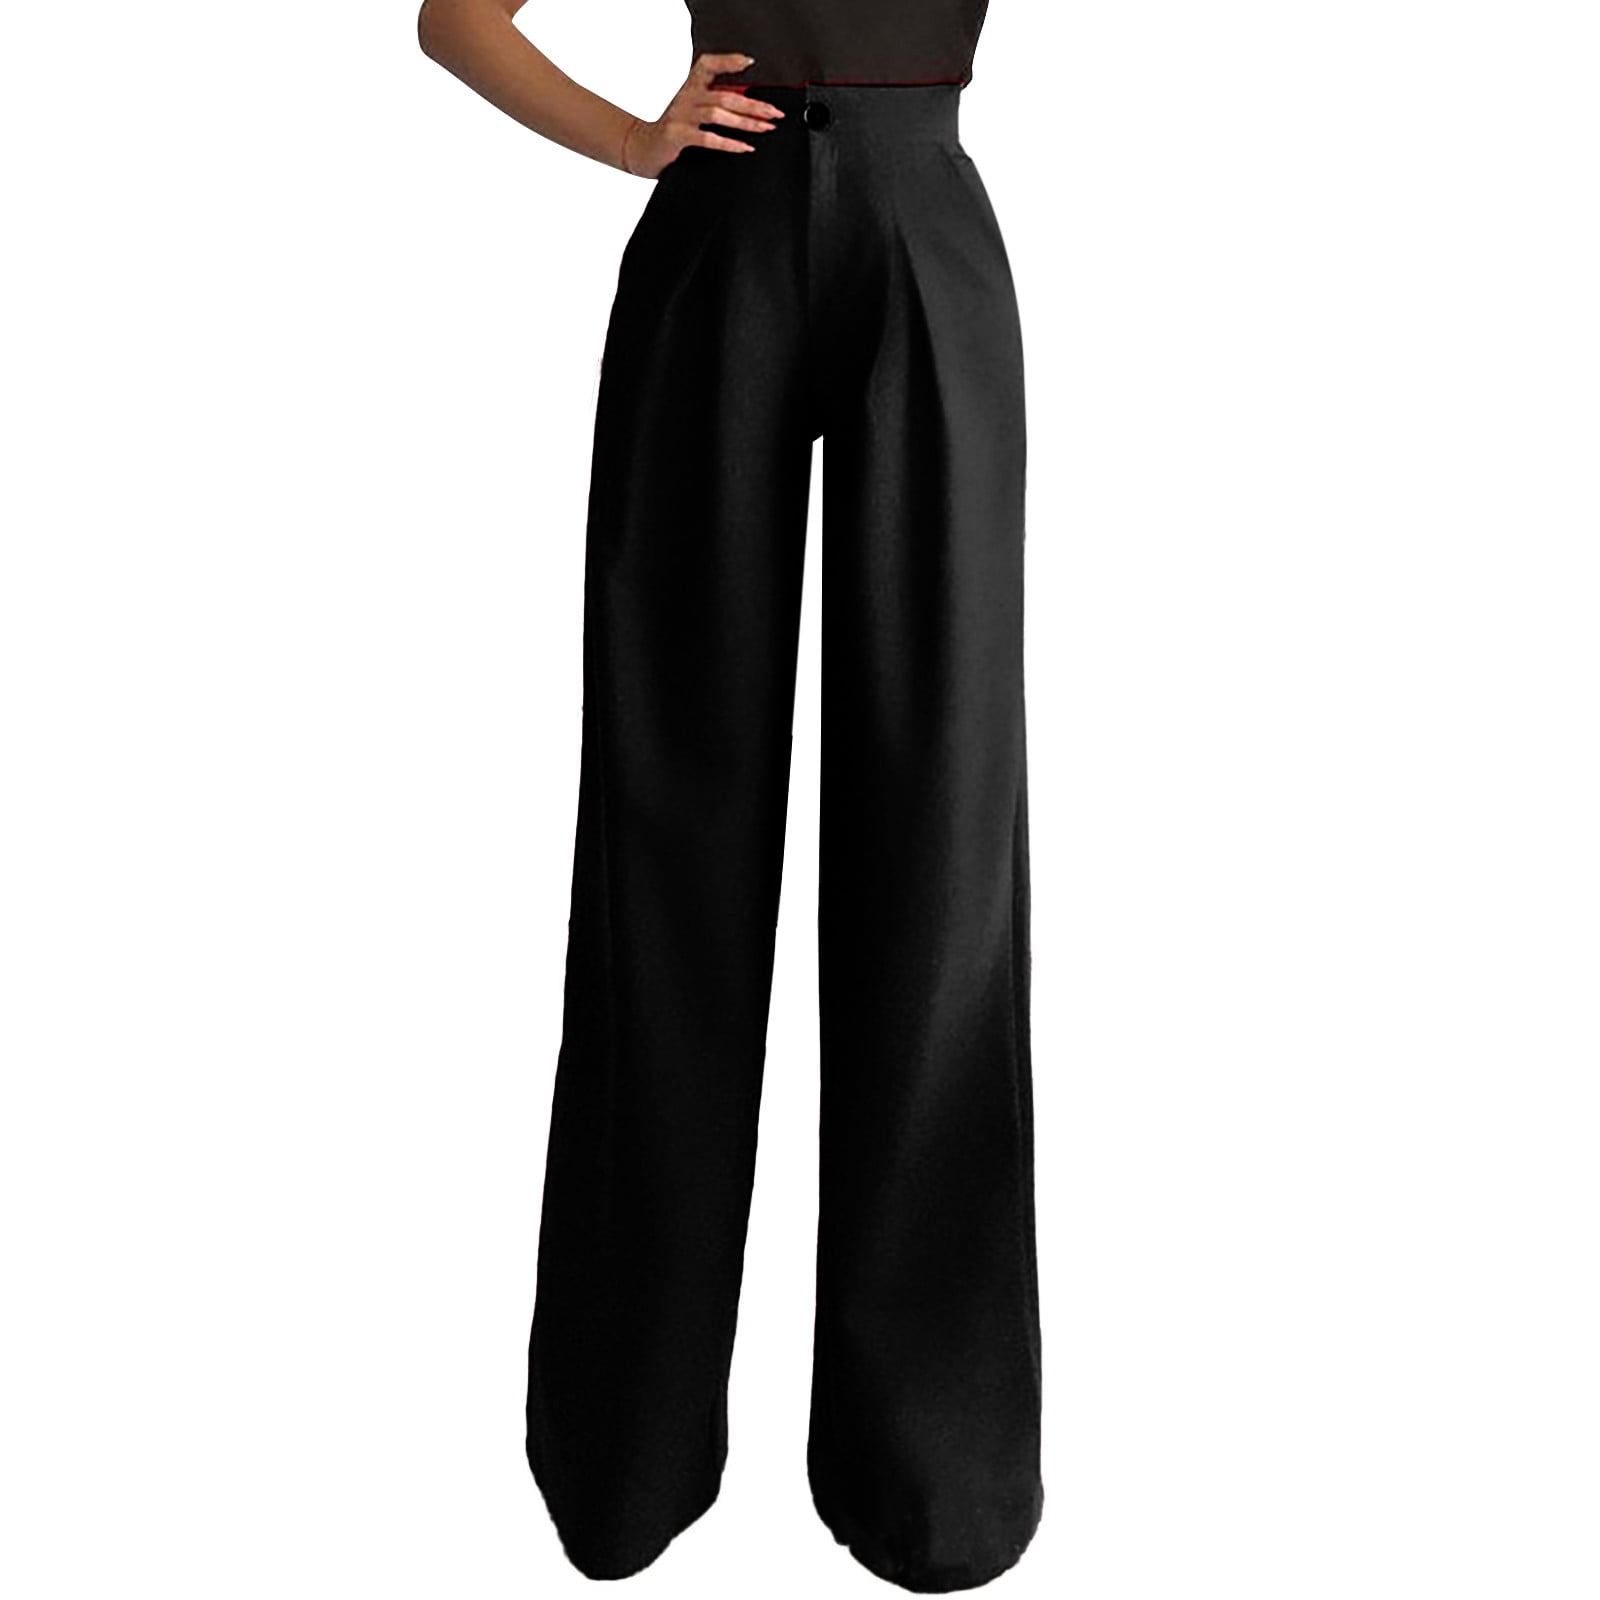 HSMQHJWE Puffy Pants Petite Dress Pants For Women Business Casual Womens  Solid Casual High Waisted Wide Leg Palazzo Pants Trousers Soft Women 